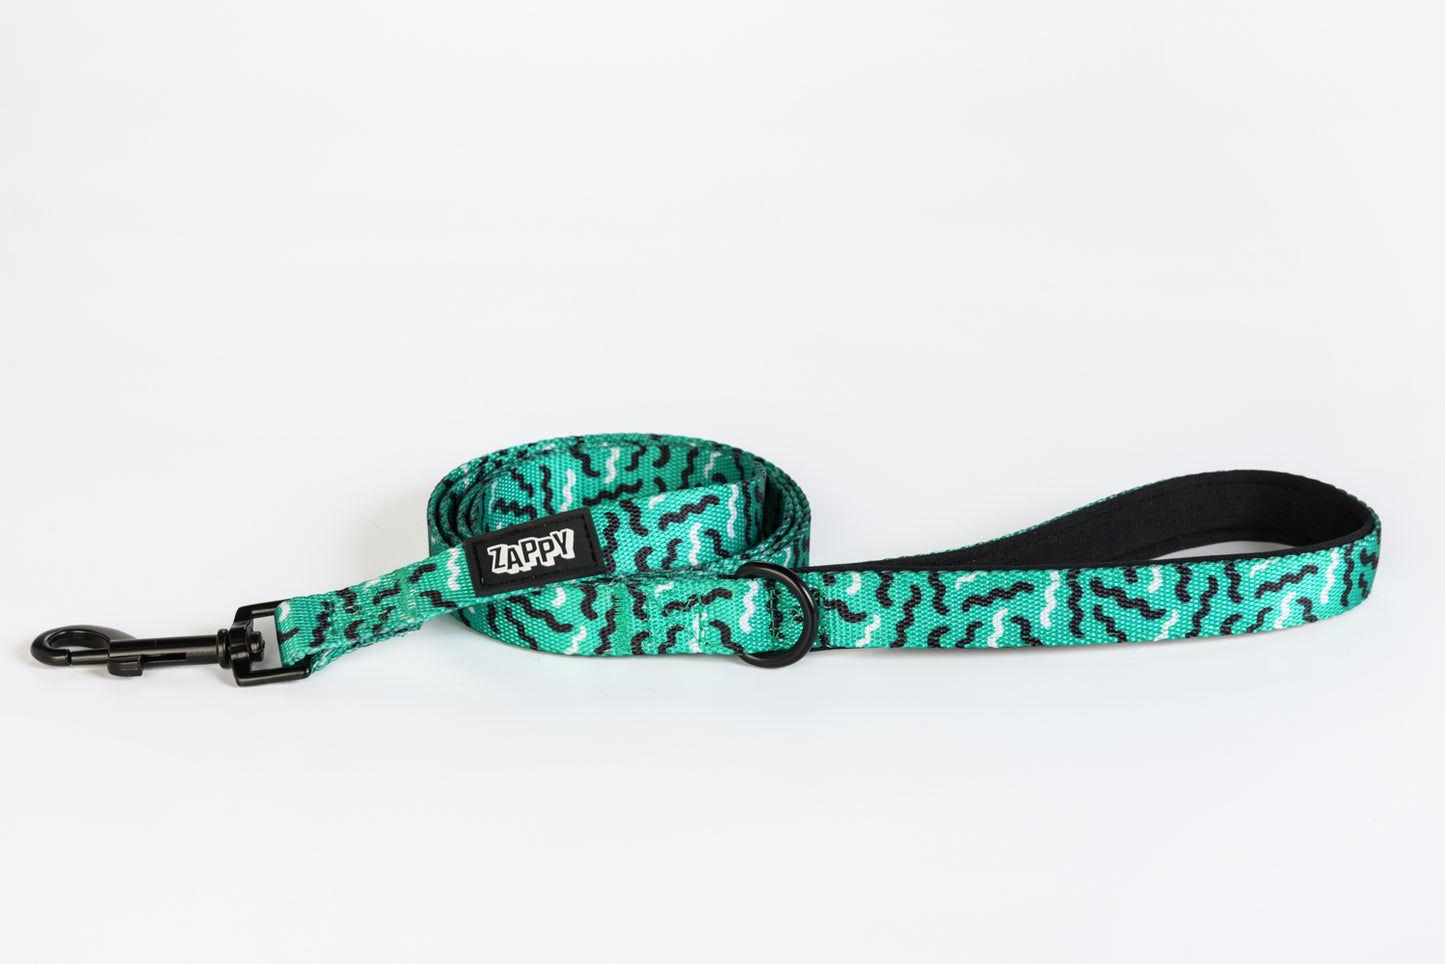 Patterned Leashes